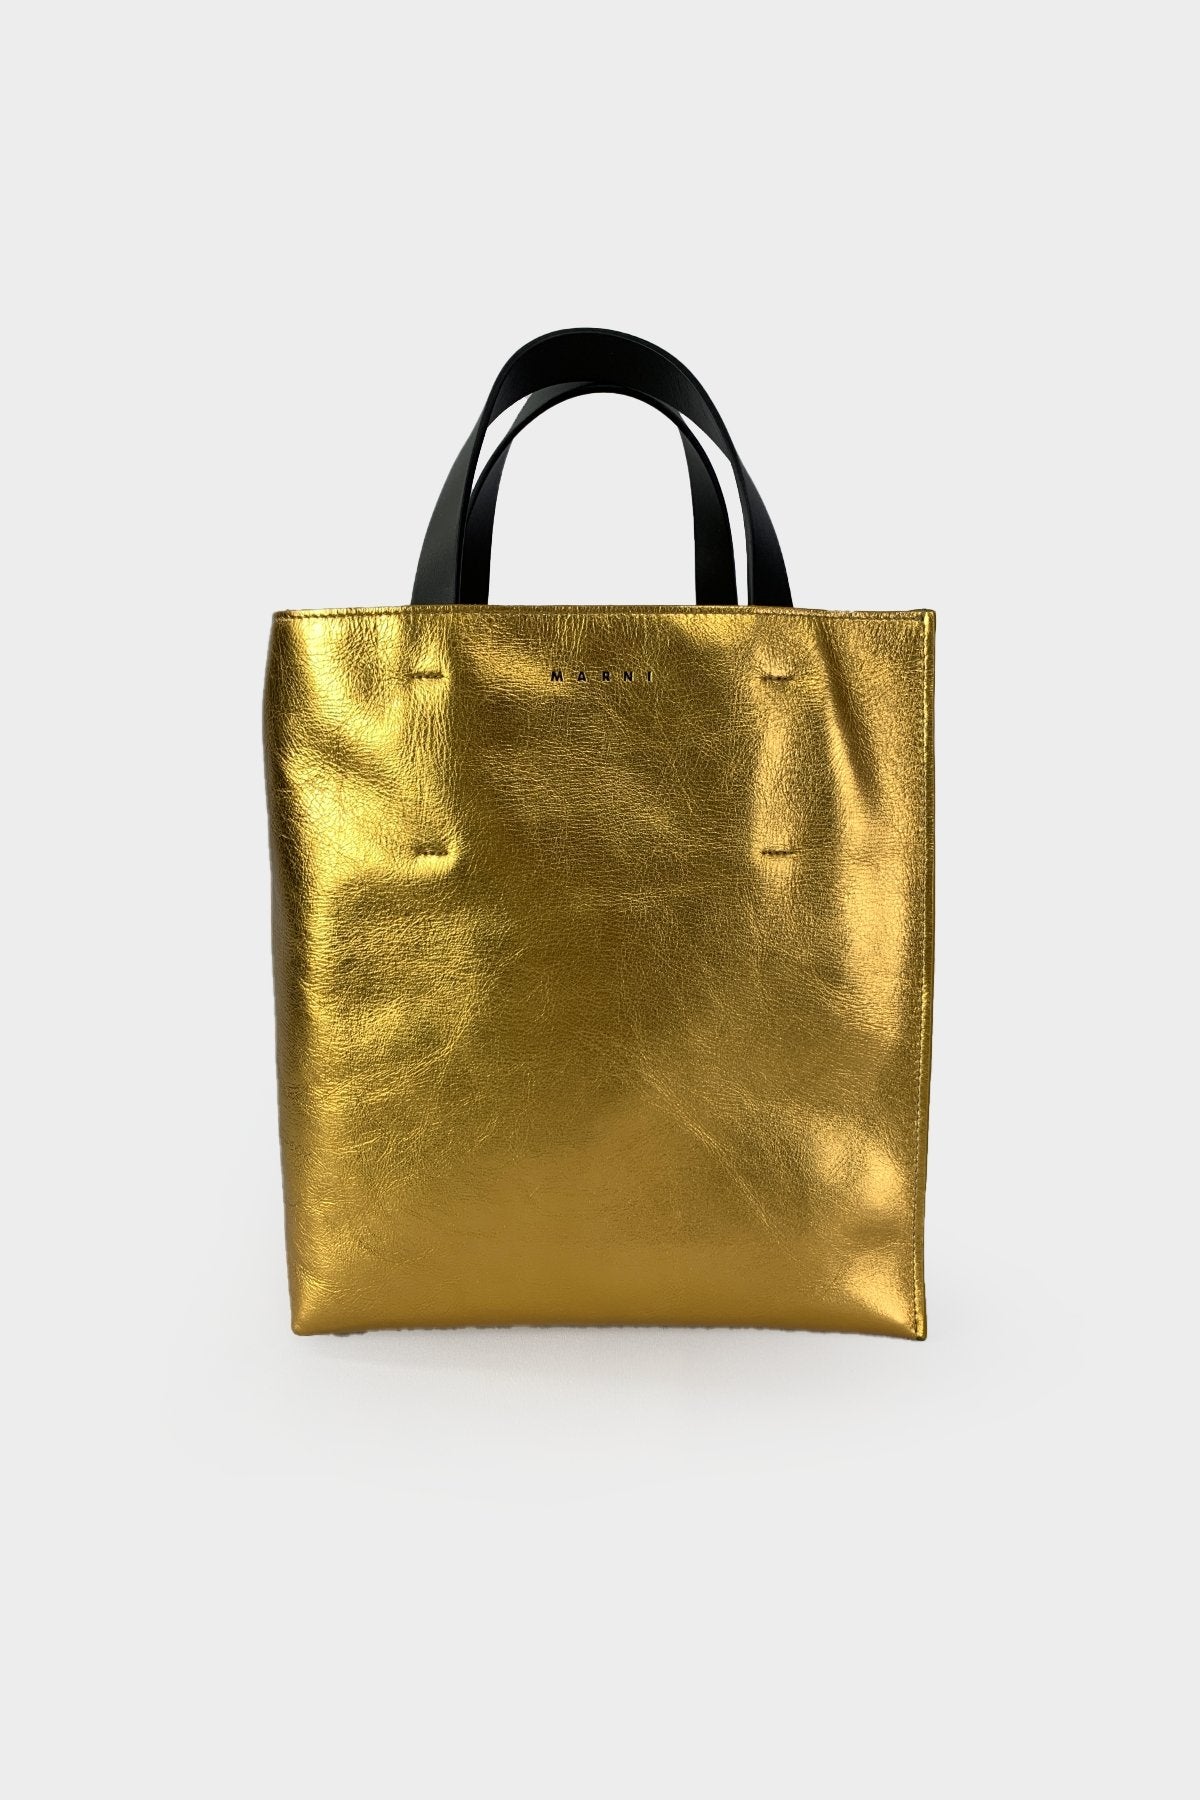 Gold and Green Tumbled Leather Museo Soft Bag - shop-olivia.com